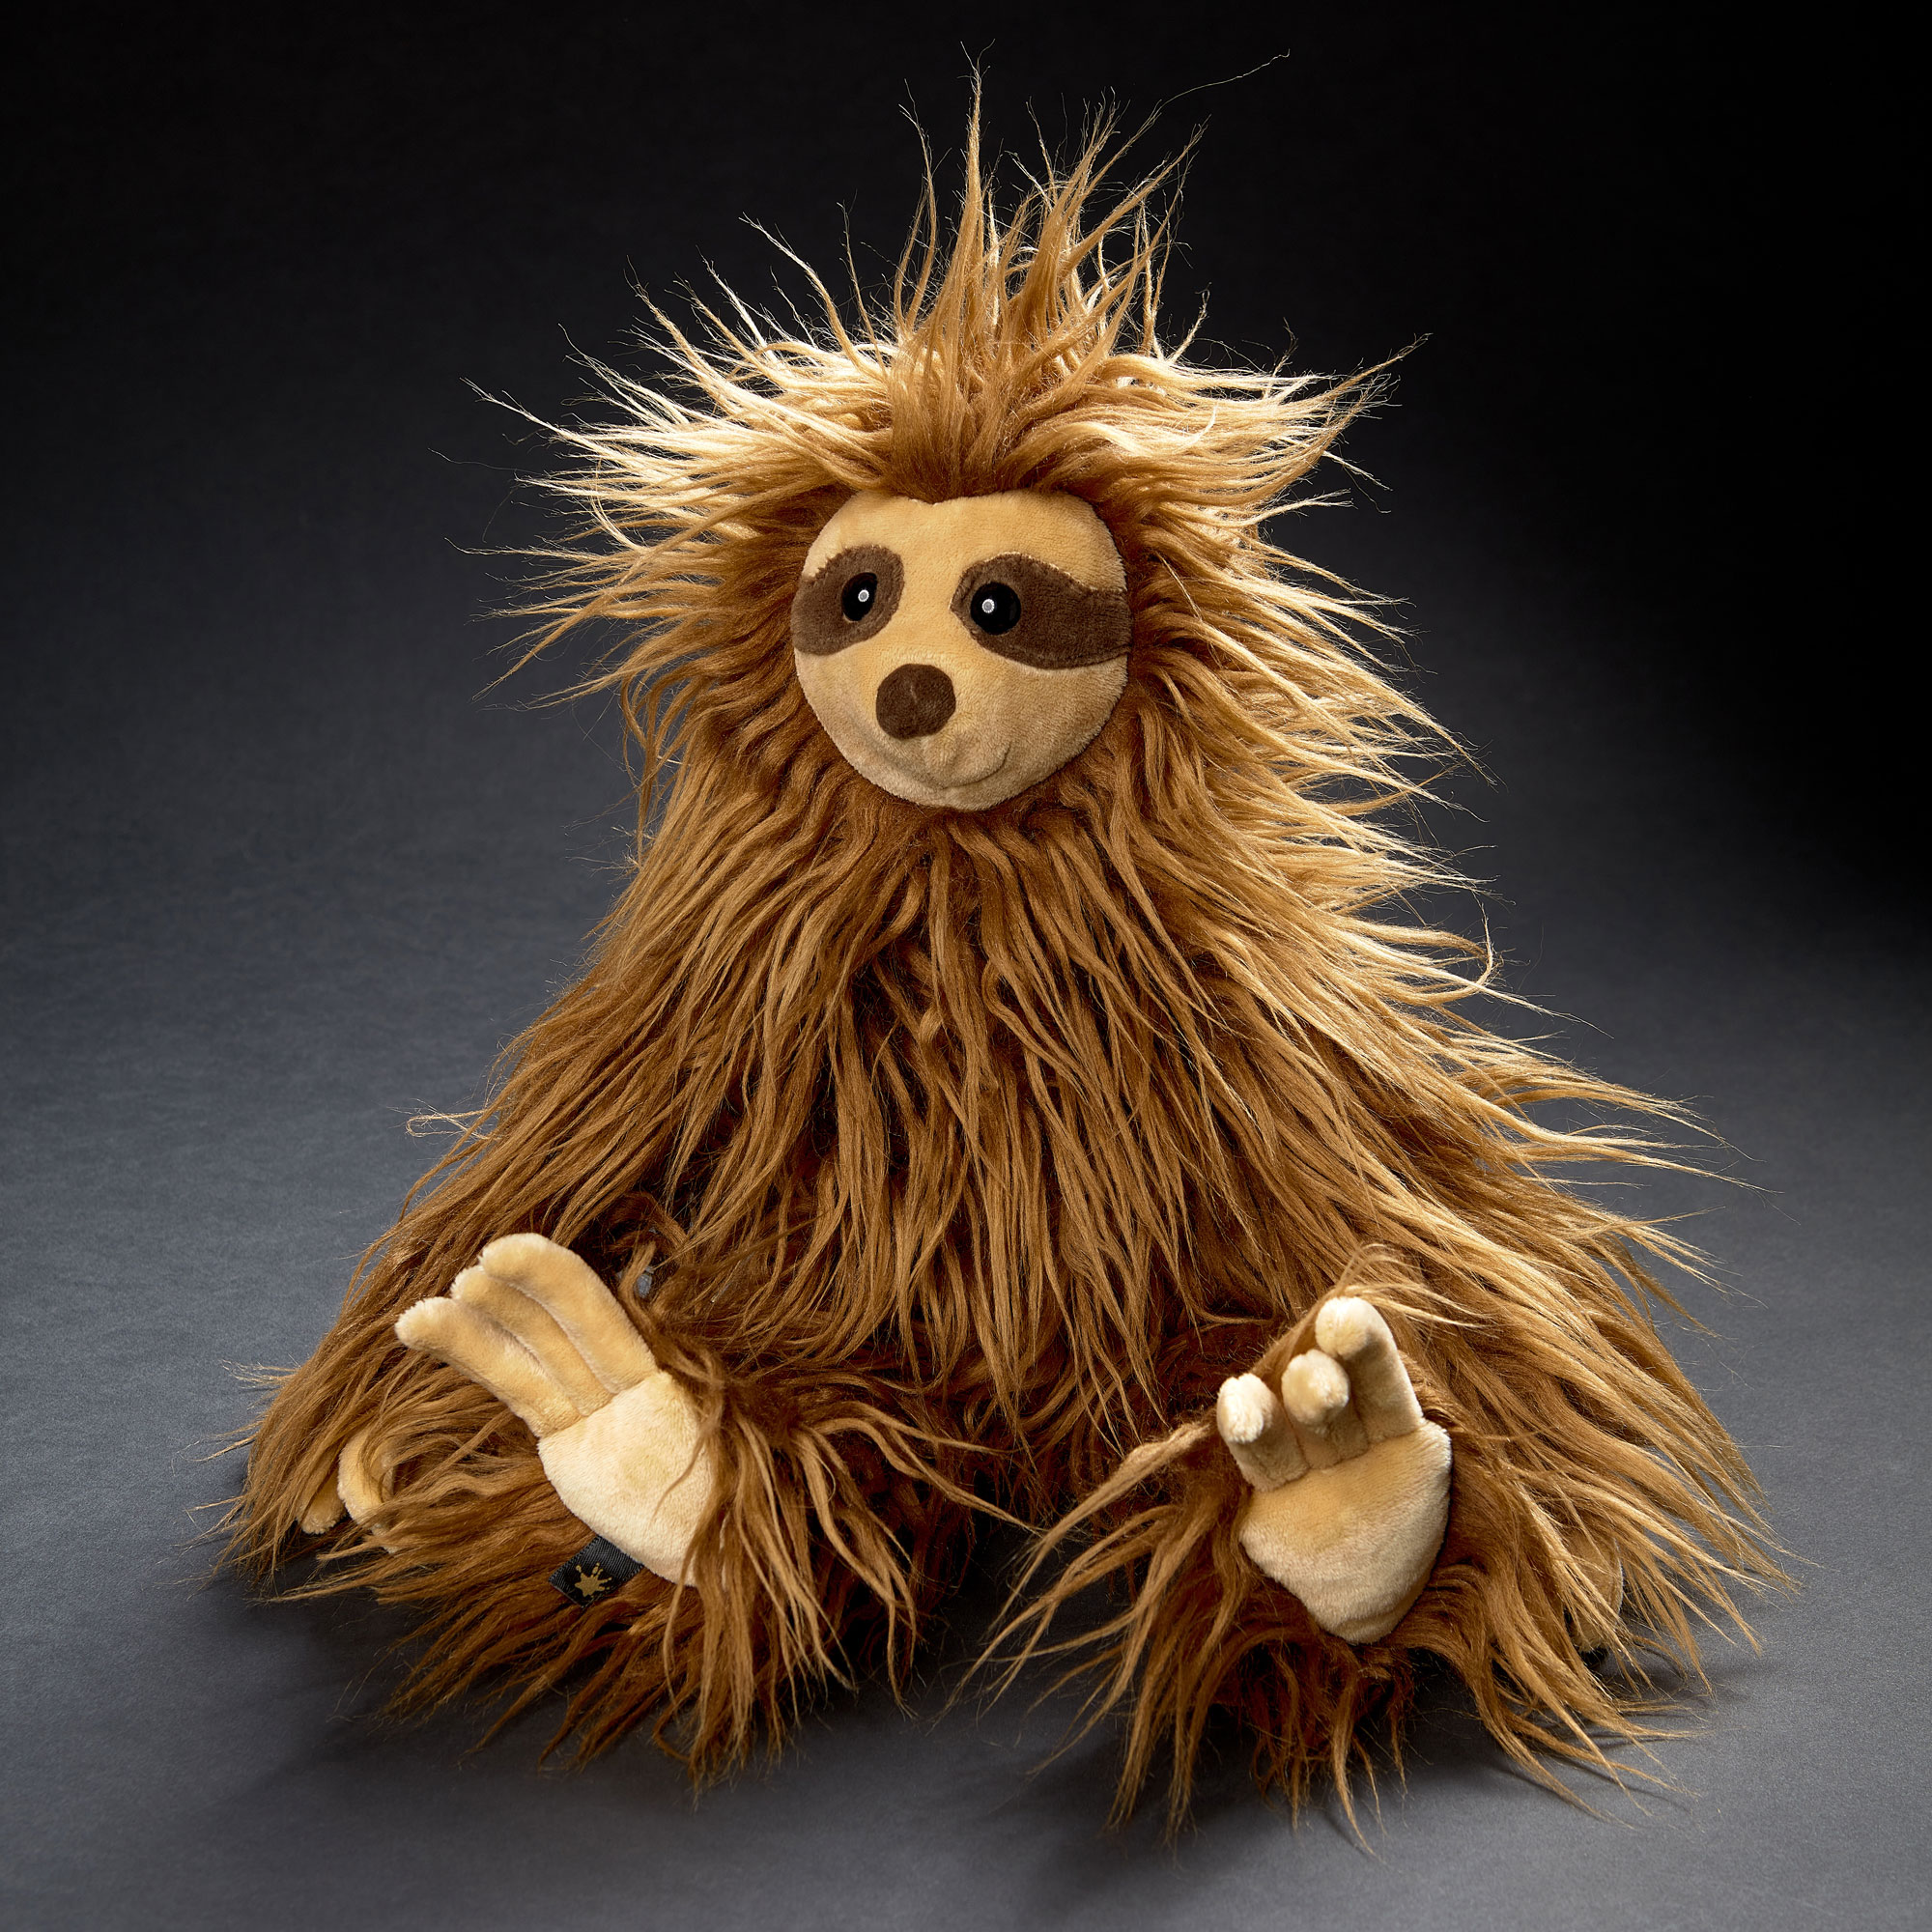 Plush toy sloth Trudel Trude II, Beasts collection